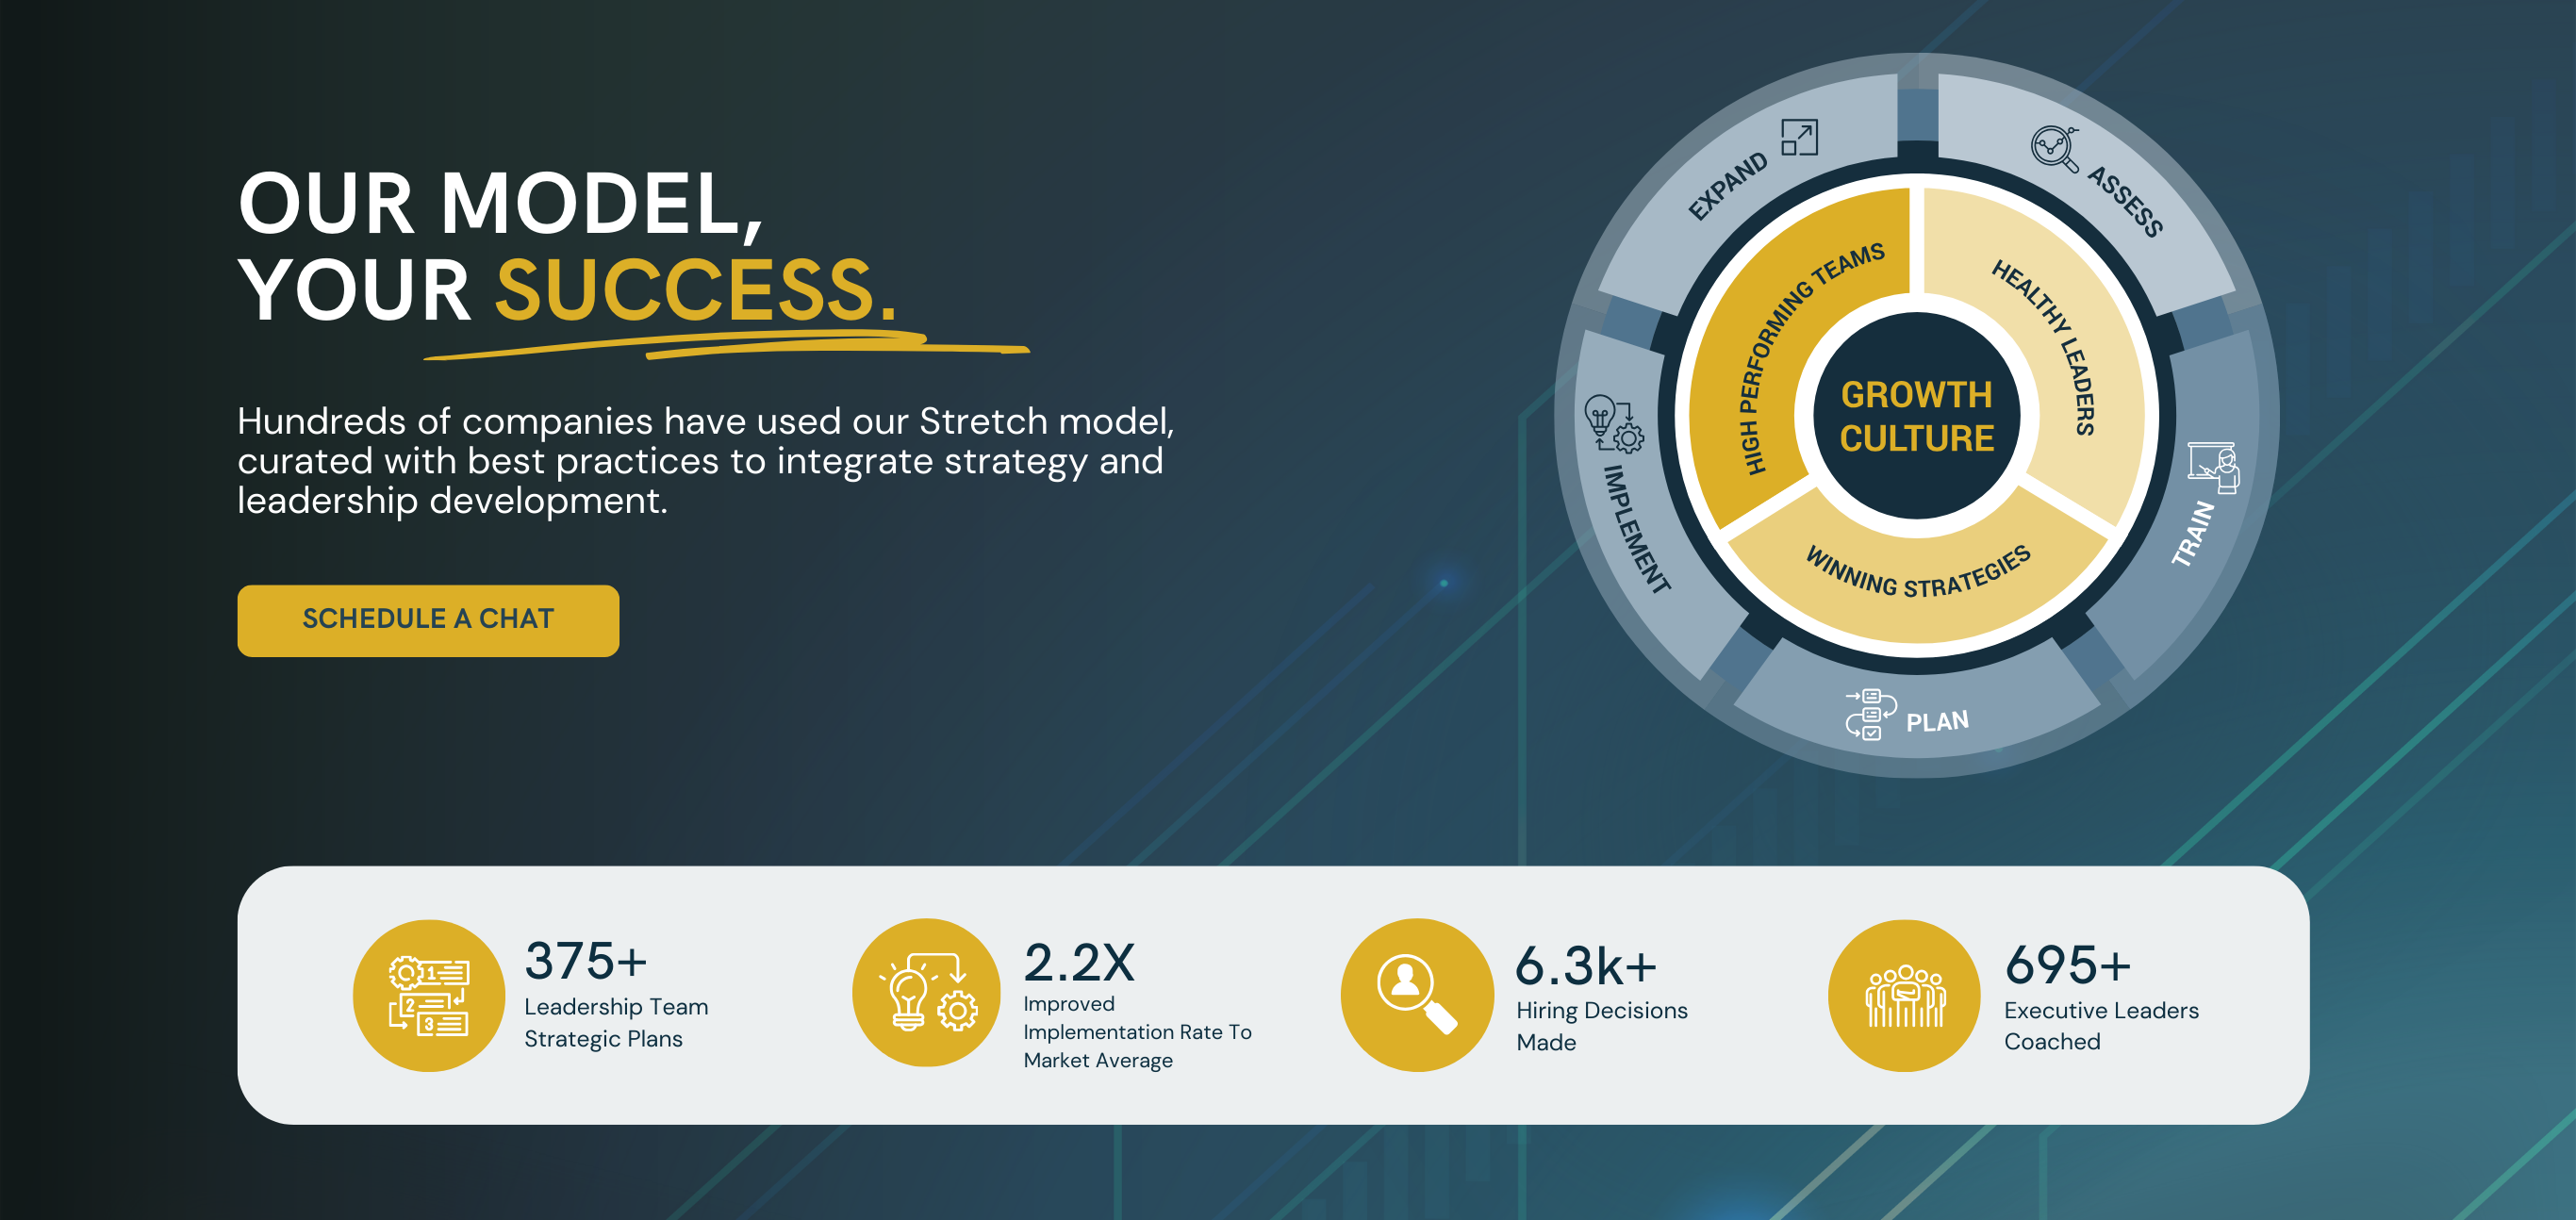 Our model, your success. Hundreds of companies have used our Stretch model, curated with best practices to integrate strategy and leadership development.